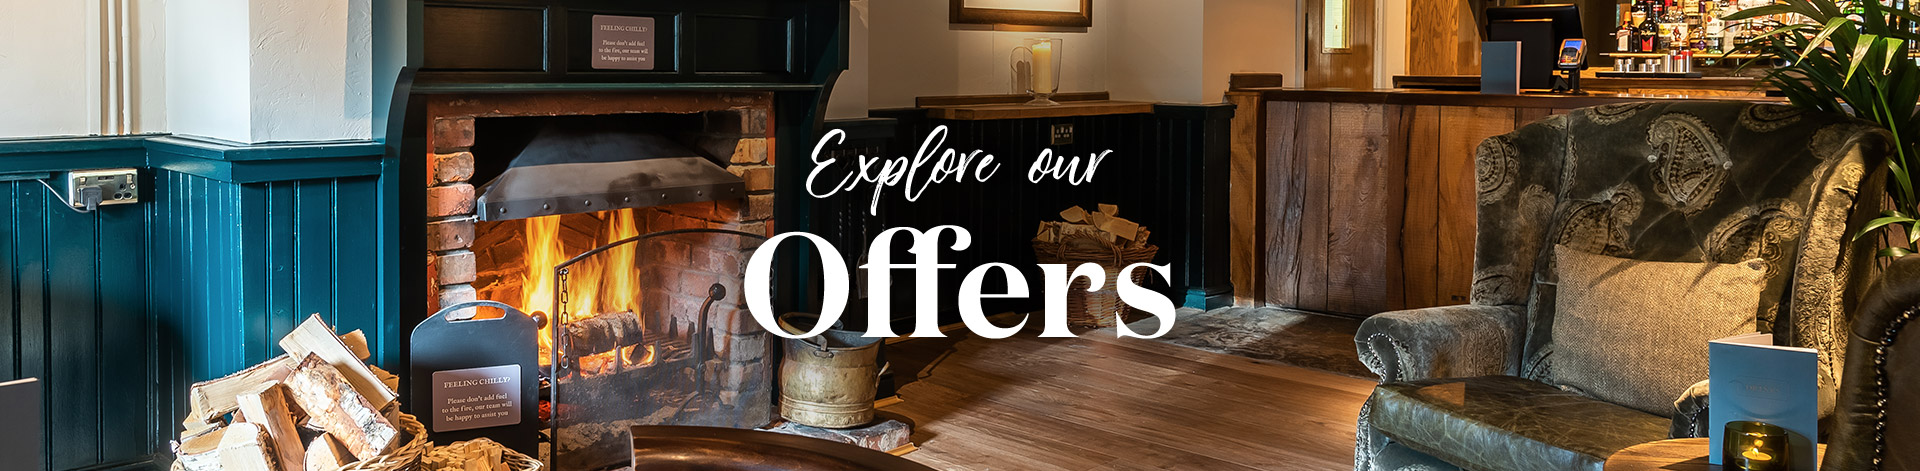 Our latest offers at The Saint George and Dragon